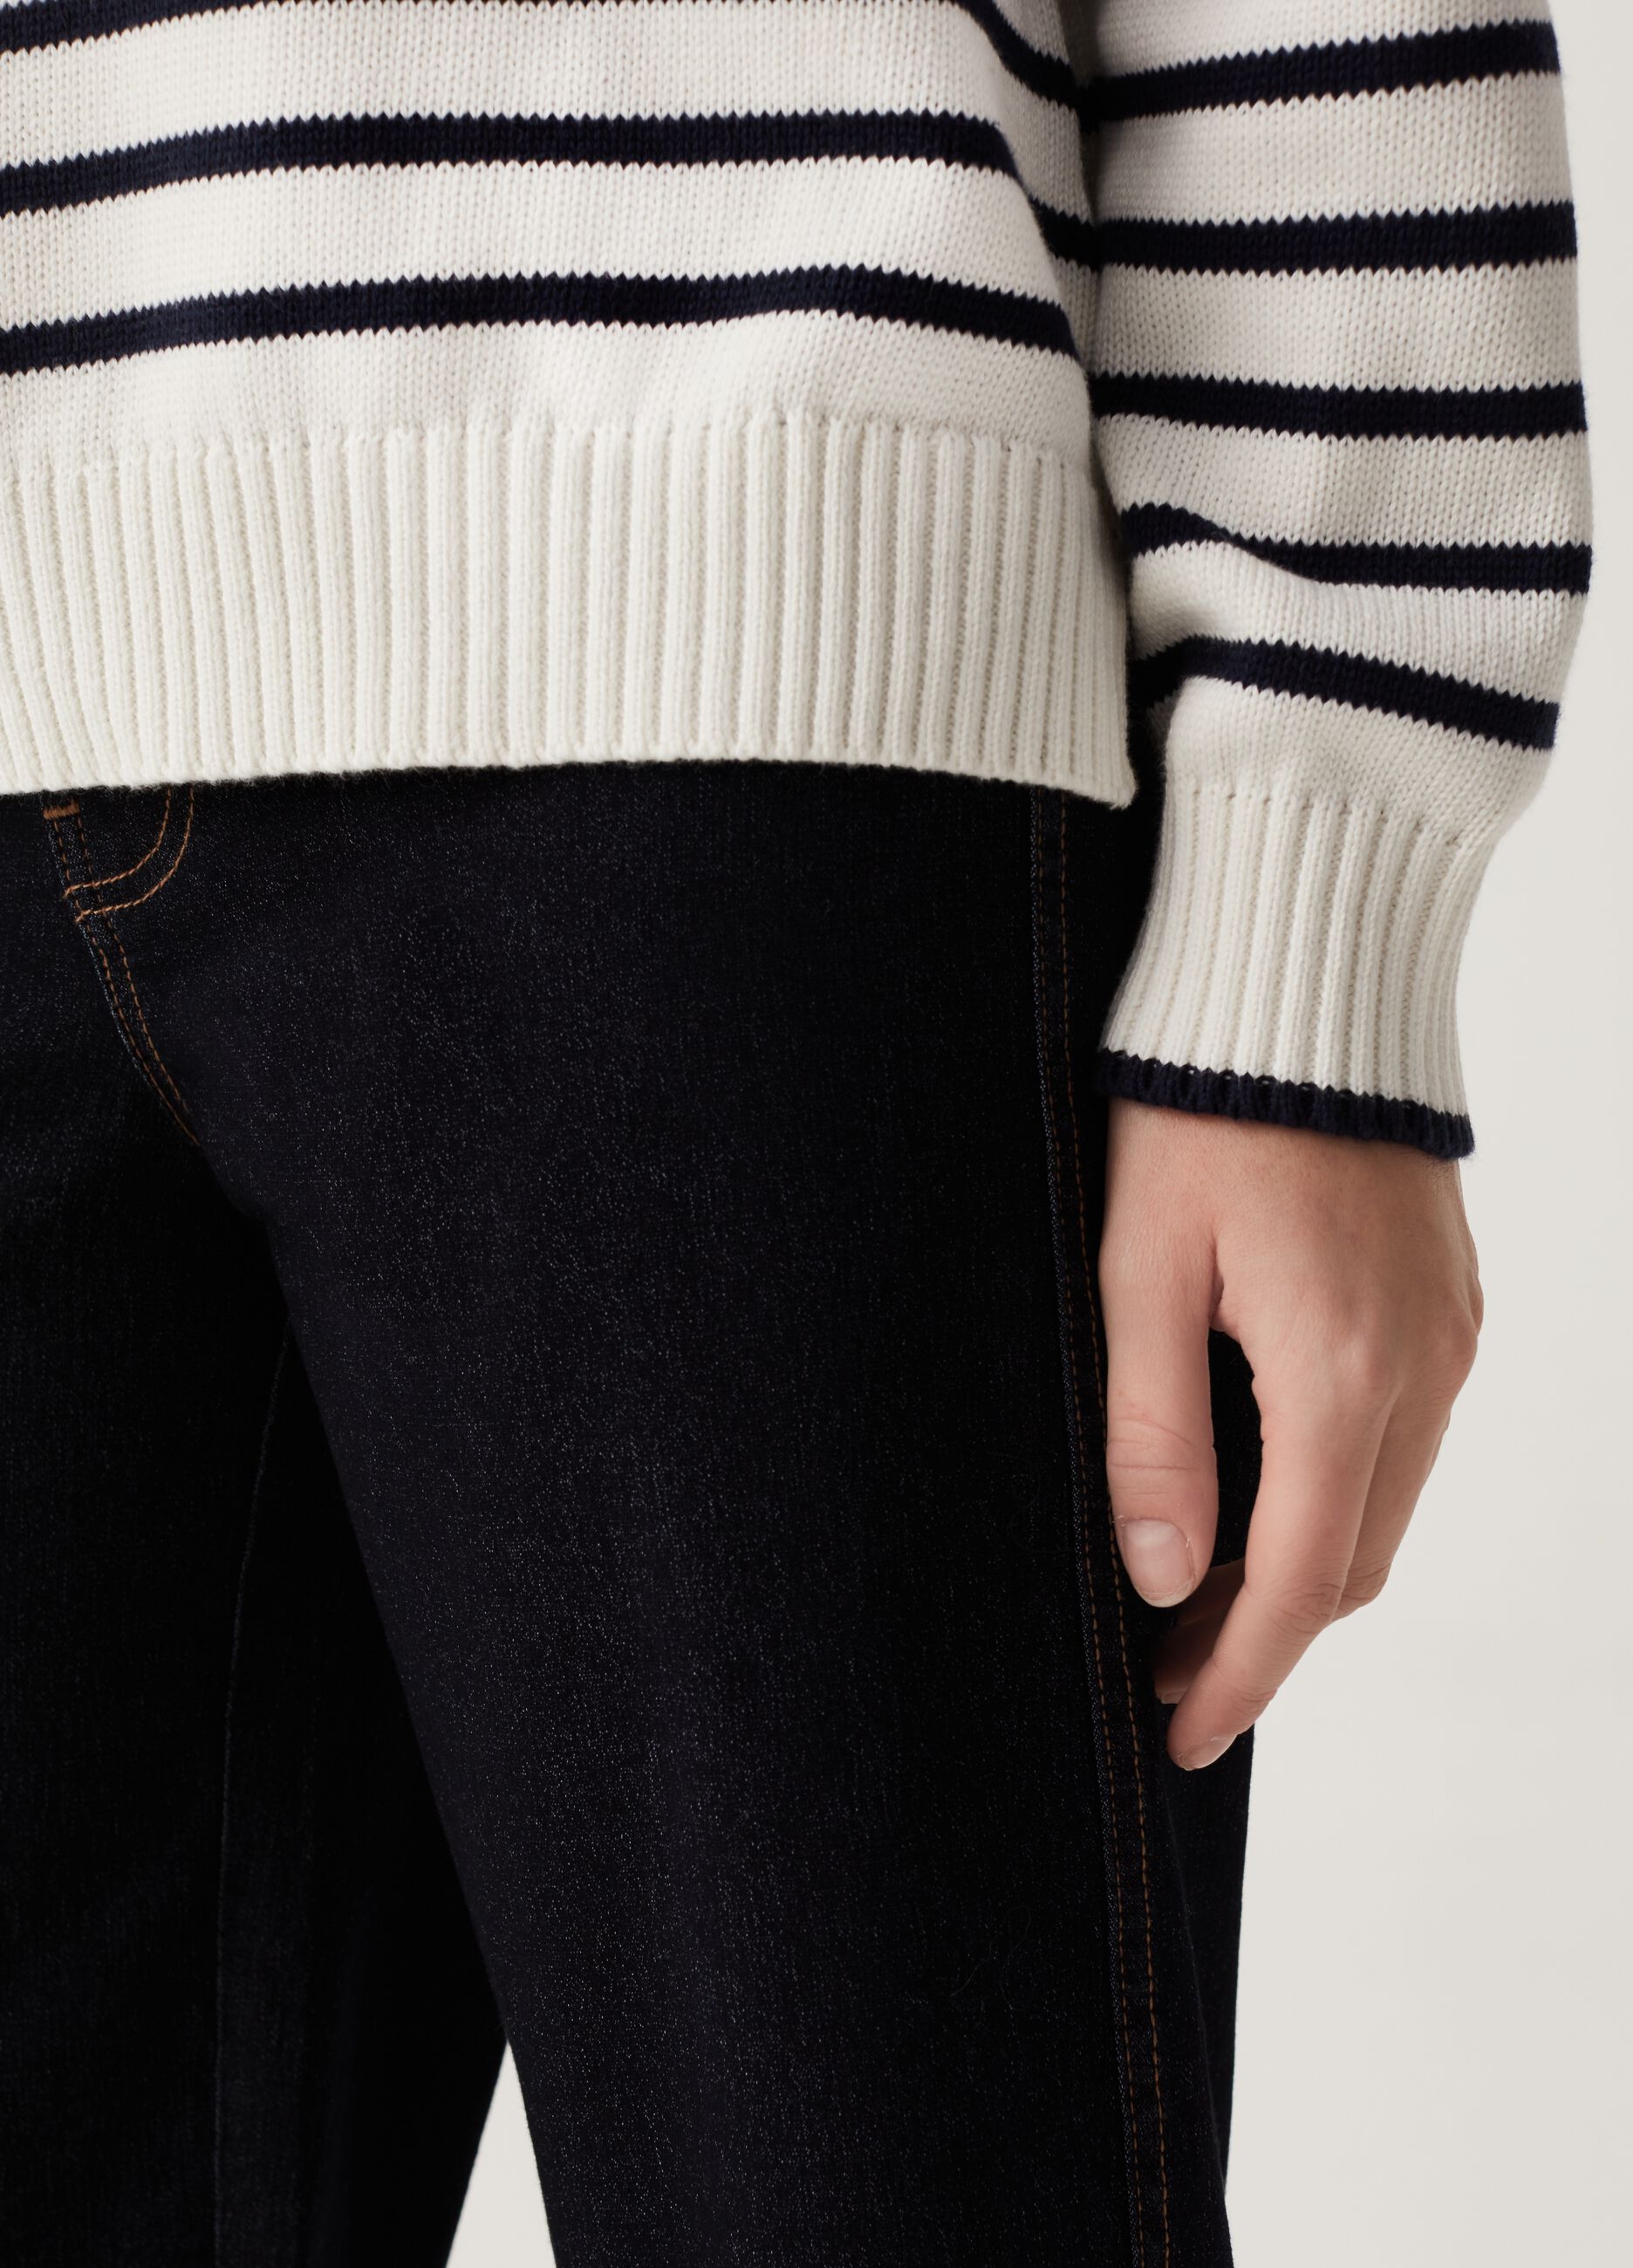 Pullover with striped mock neck